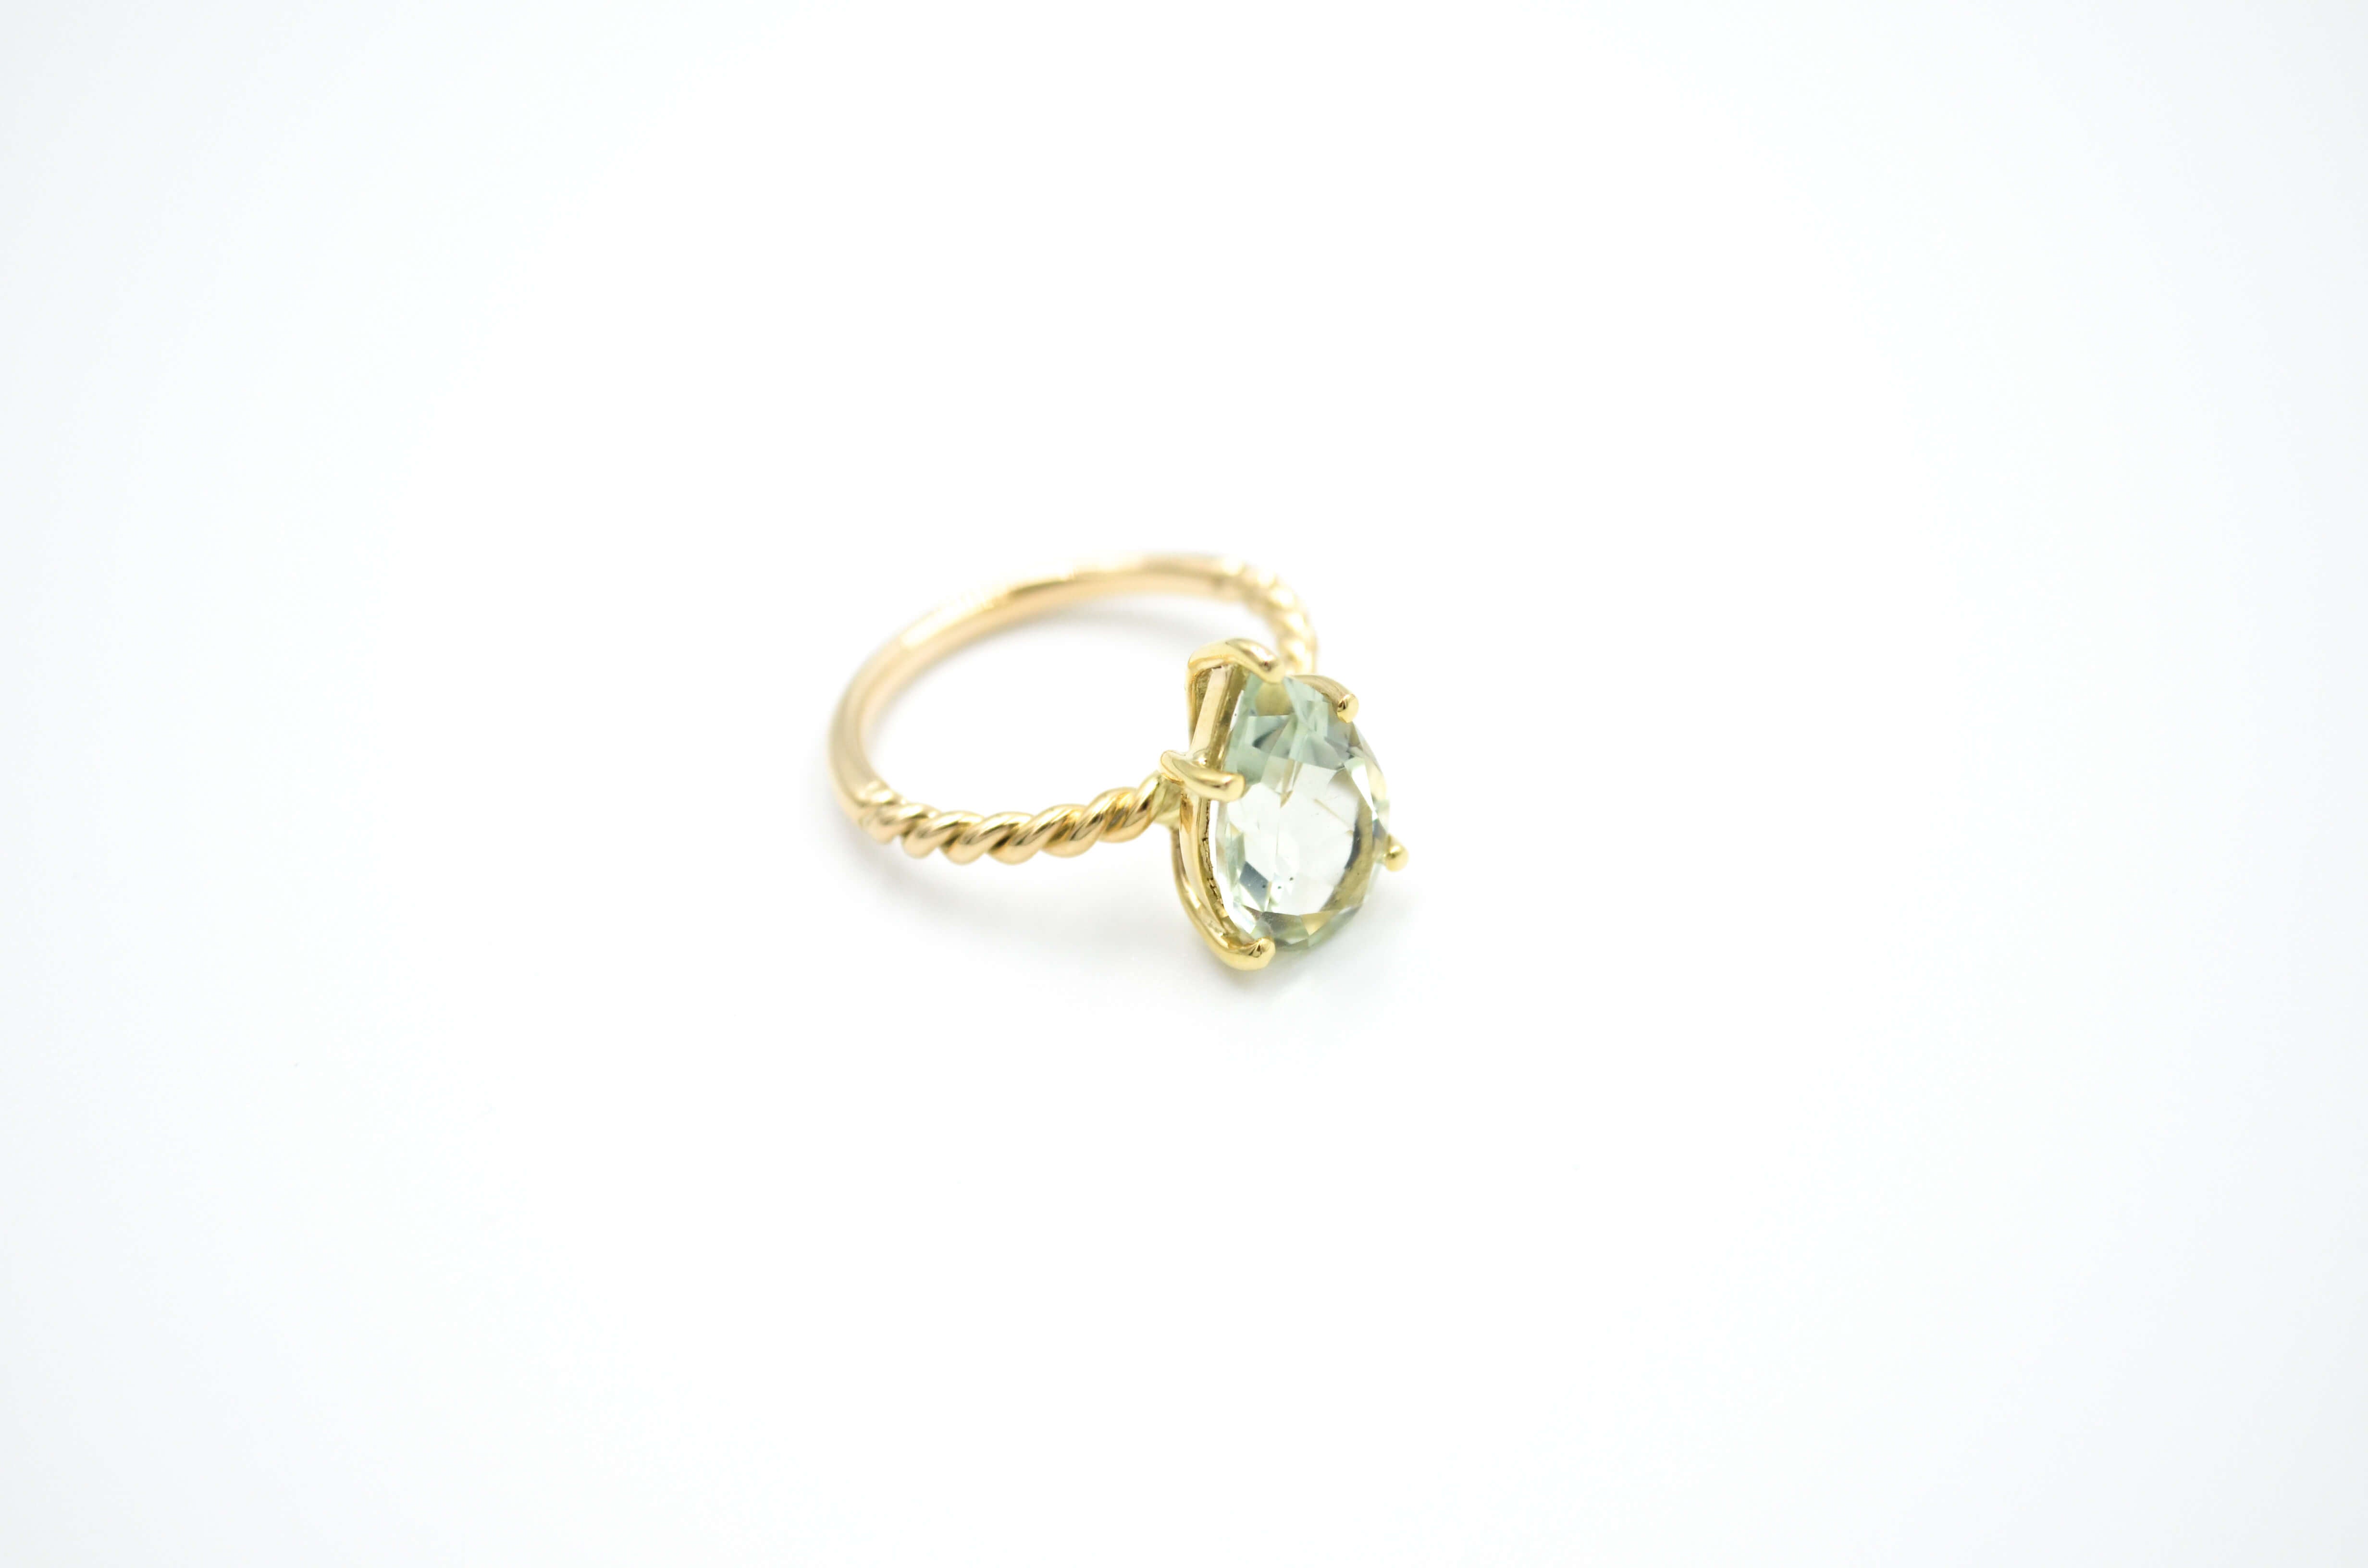 Green Amethyst (2,72ct) Twisted Ring, 9-18K Yellow Gold